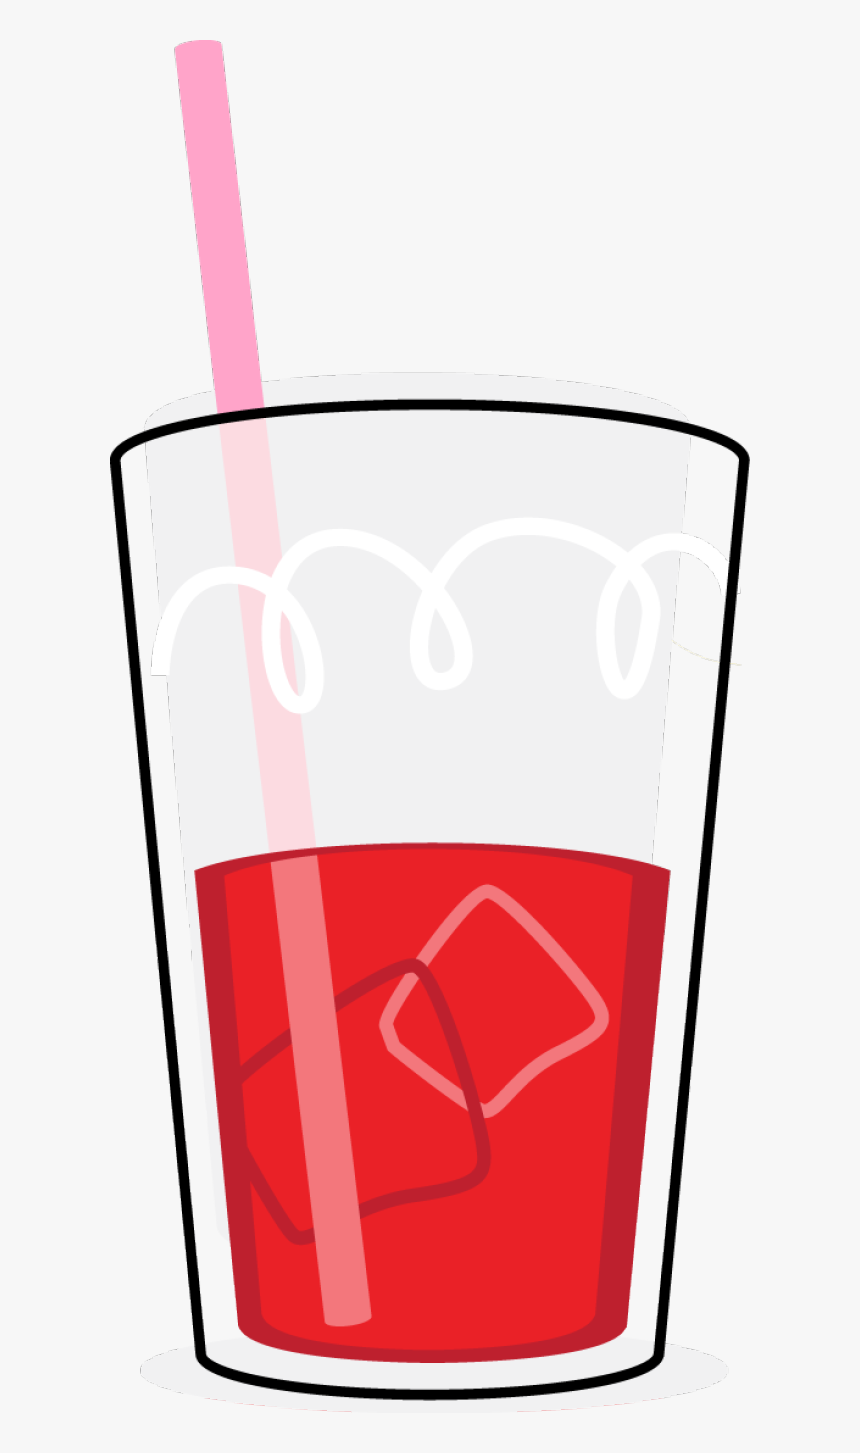 Kool Aid Clip Art Clipart Images Gallery For Free Download - Kool Aid Clipart